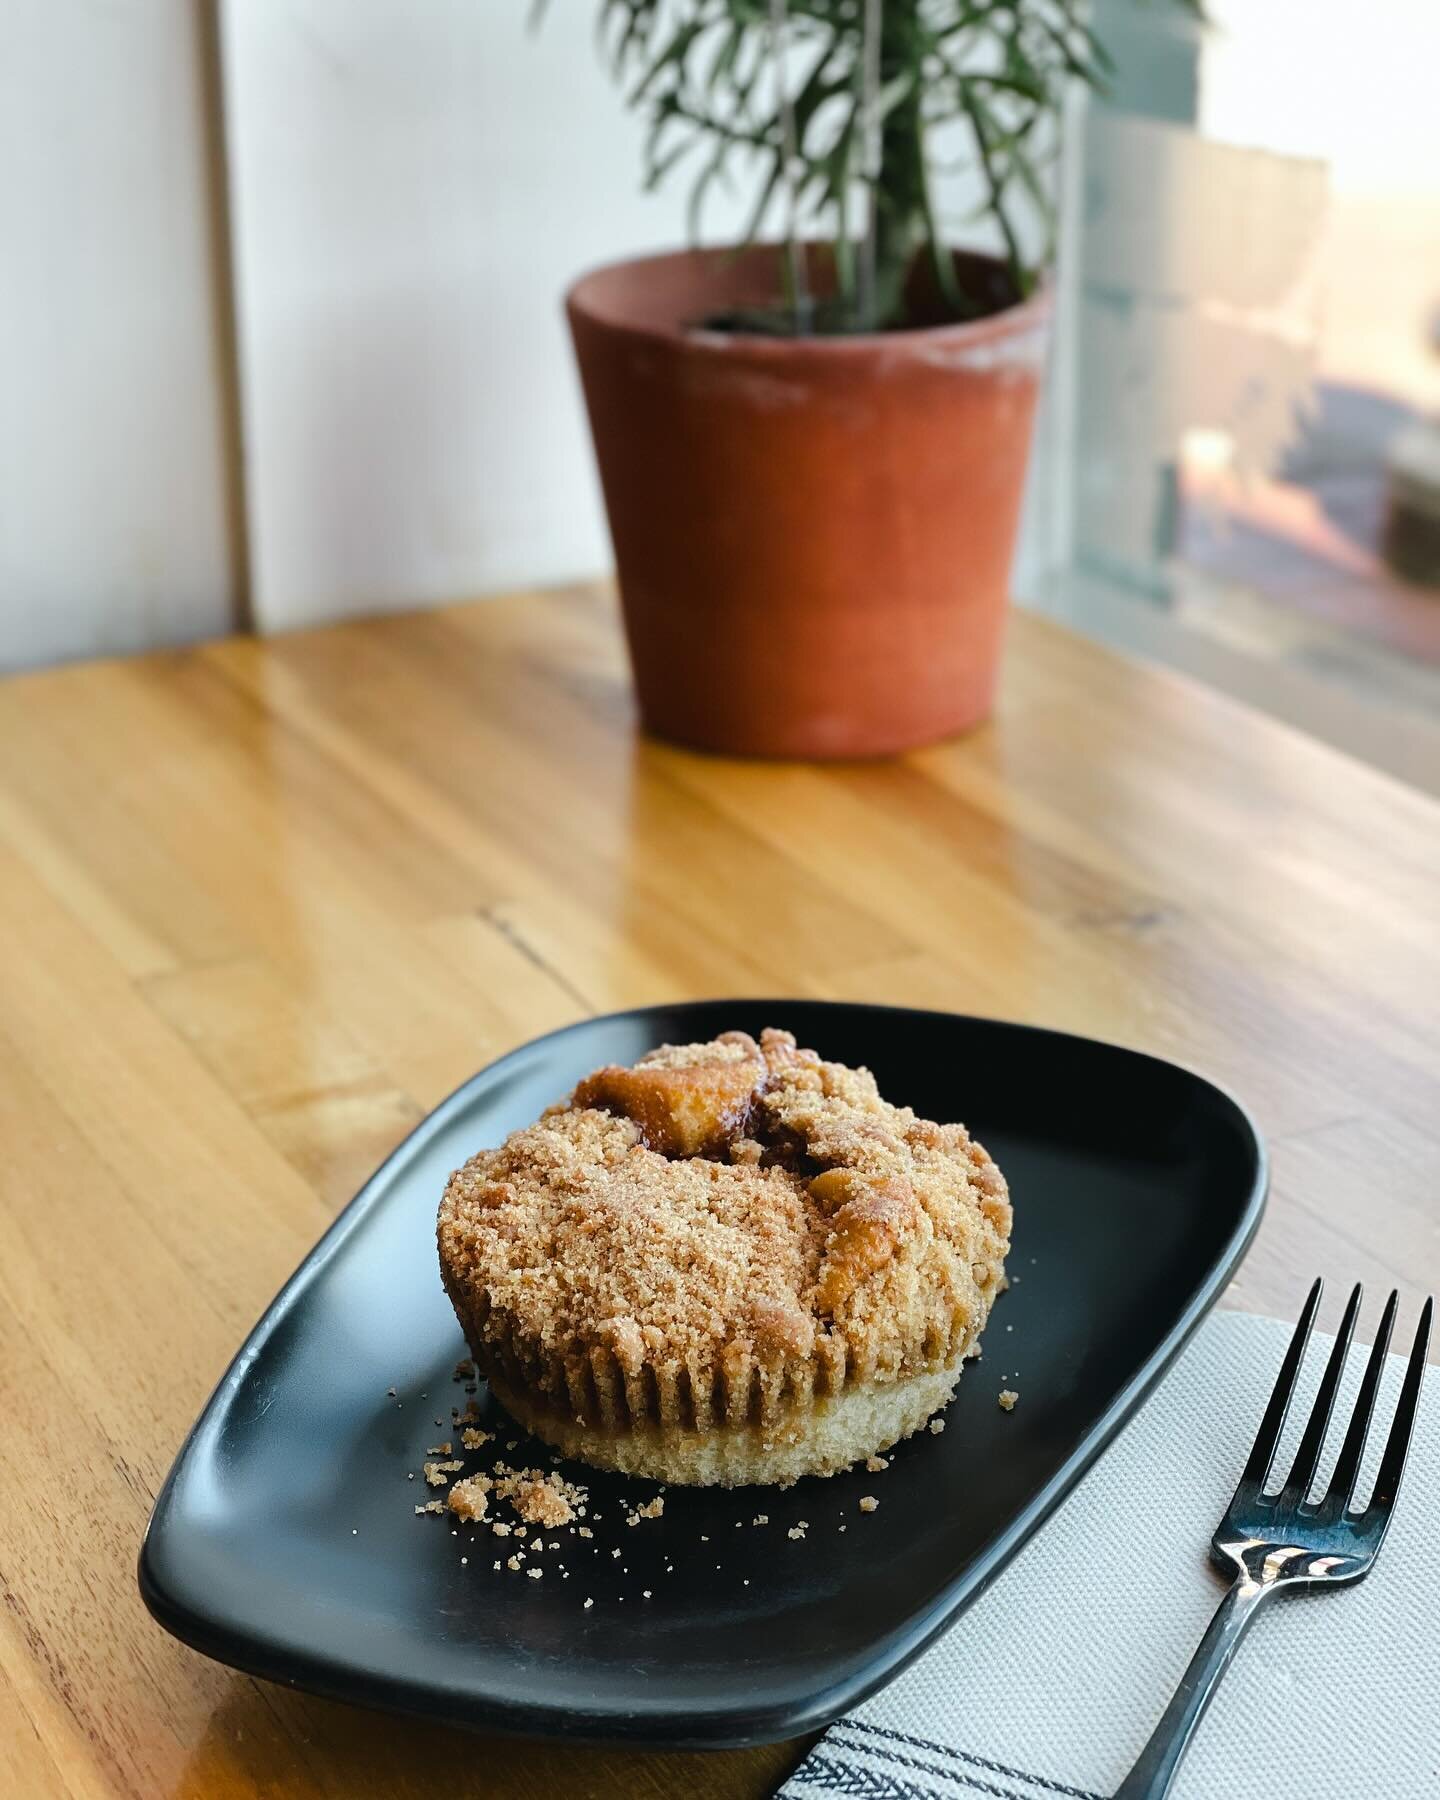 ⬆️ Hold the dots down below the photo and scroll to make the coffee cake disappear 🤭 (And then come and grab one of your own!)
.
.
.
#coffee #coffeecake #coffeeshop #local #shoplocal #localcoffee #localcoffeeshop #arkansas #littlerock #littlerockark